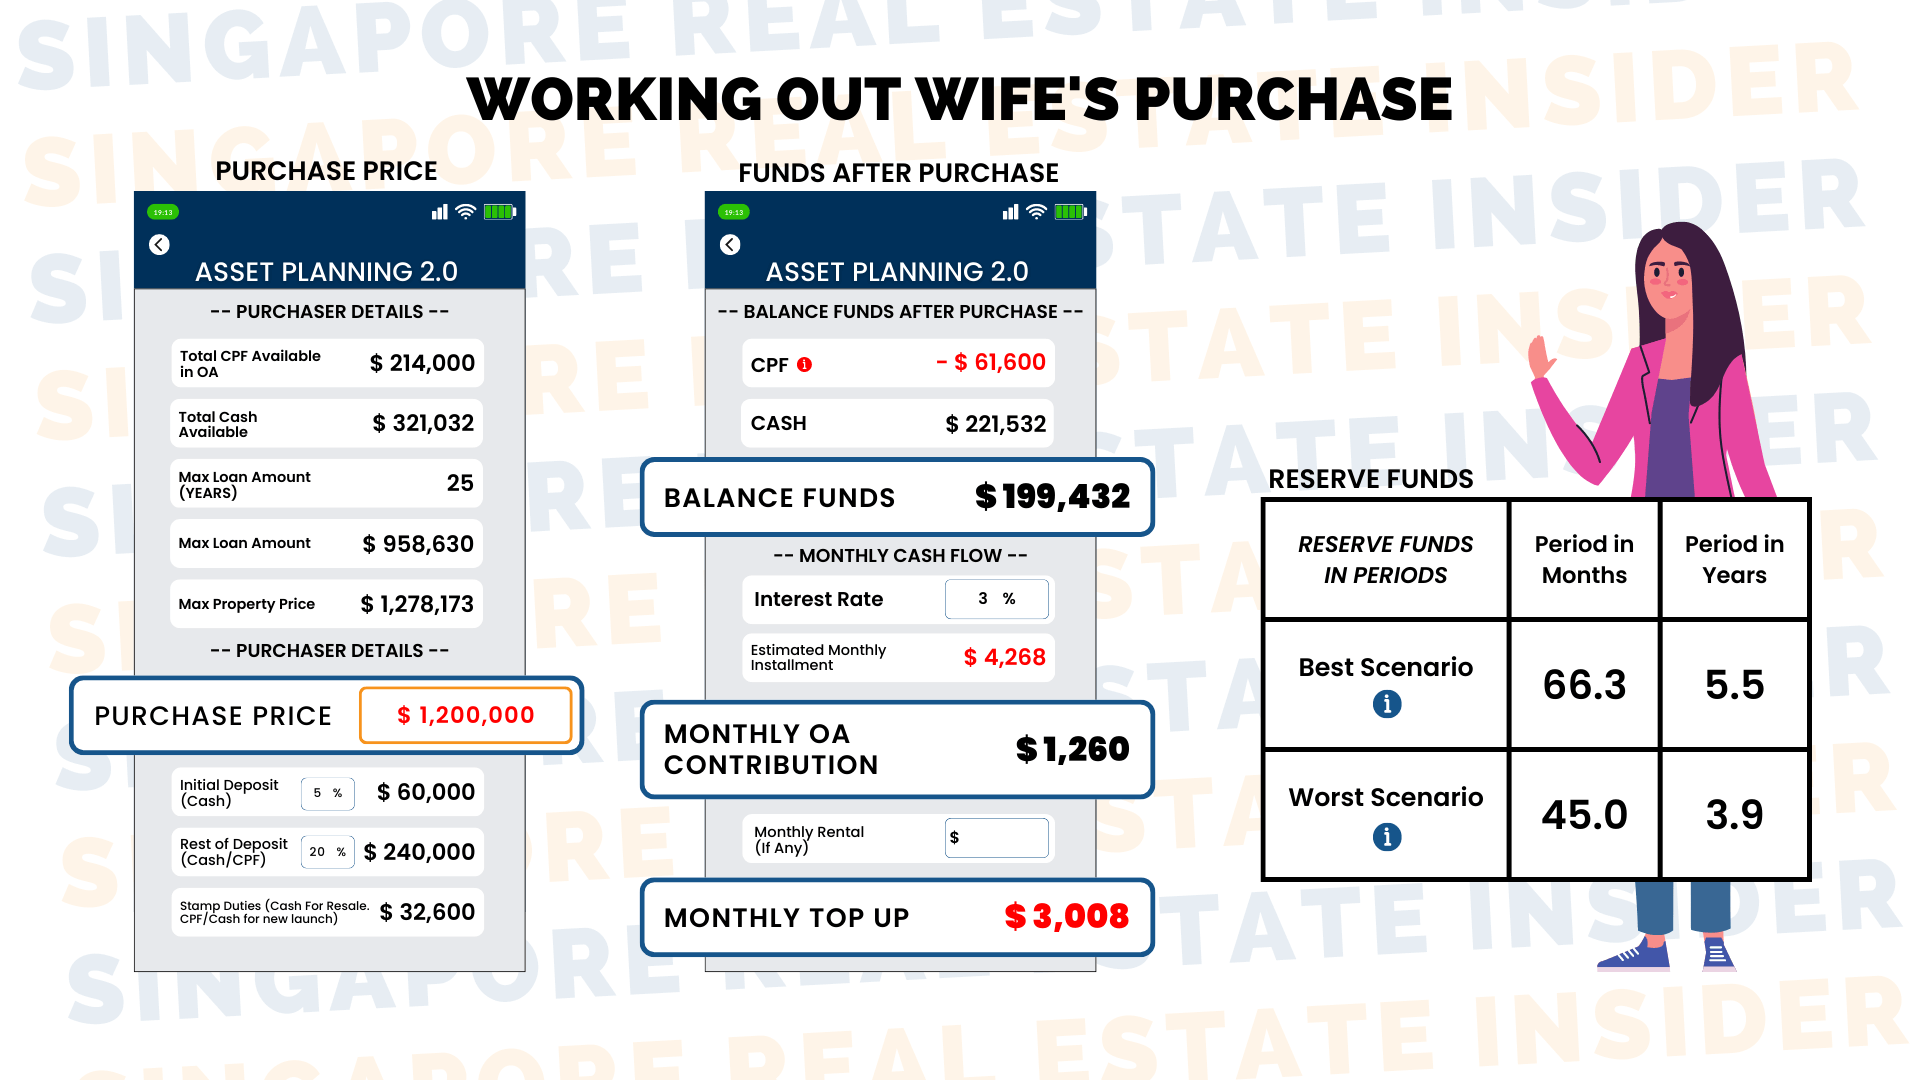 Working out wife's purchase